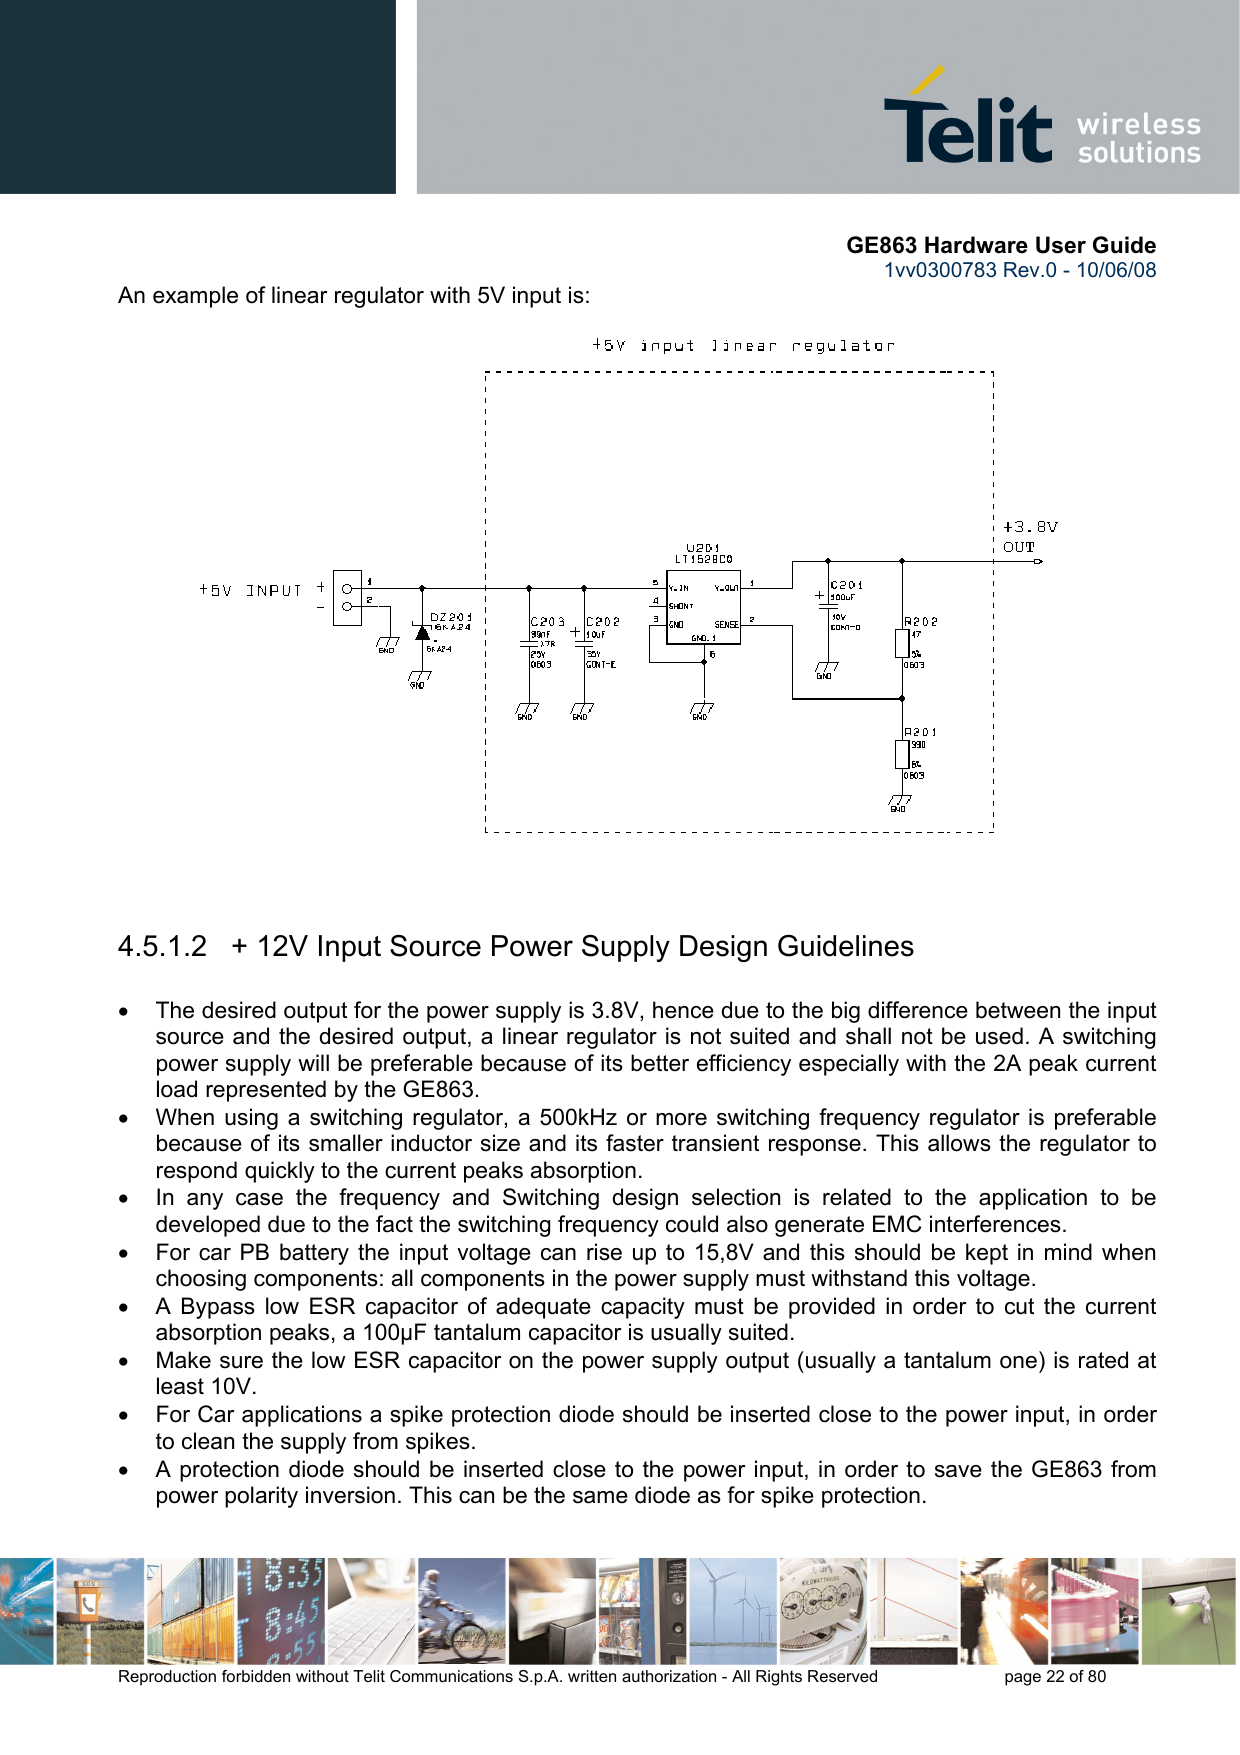       GE863 Hardware User Guide 1vv0300783 Rev.0 - 10/06/08 Reproduction forbidden without Telit Communications S.p.A. written authorization - All Rights Reserved    page 22 of 80  An example of linear regulator with 5V input is:   4.5.1.2   + 12V Input Source Power Supply Design Guidelines  •  The desired output for the power supply is 3.8V, hence due to the big difference between the input source and the desired output, a linear regulator is not suited and shall not be used. A switching power supply will be preferable because of its better efficiency especially with the 2A peak current load represented by the GE863. •  When using a switching regulator, a 500kHz or more switching frequency regulator is preferable because of its smaller inductor size and its faster transient response. This allows the regulator to respond quickly to the current peaks absorption.  •  In any case the frequency and Switching design selection is related to the application to be developed due to the fact the switching frequency could also generate EMC interferences. •  For car PB battery the input voltage can rise up to 15,8V and this should be kept in mind when choosing components: all components in the power supply must withstand this voltage. •  A Bypass low ESR capacitor of adequate capacity must be provided in order to cut the current absorption peaks, a 100μF tantalum capacitor is usually suited. •  Make sure the low ESR capacitor on the power supply output (usually a tantalum one) is rated at least 10V. •  For Car applications a spike protection diode should be inserted close to the power input, in order to clean the supply from spikes.  •  A protection diode should be inserted close to the power input, in order to save the GE863 from power polarity inversion. This can be the same diode as for spike protection.  